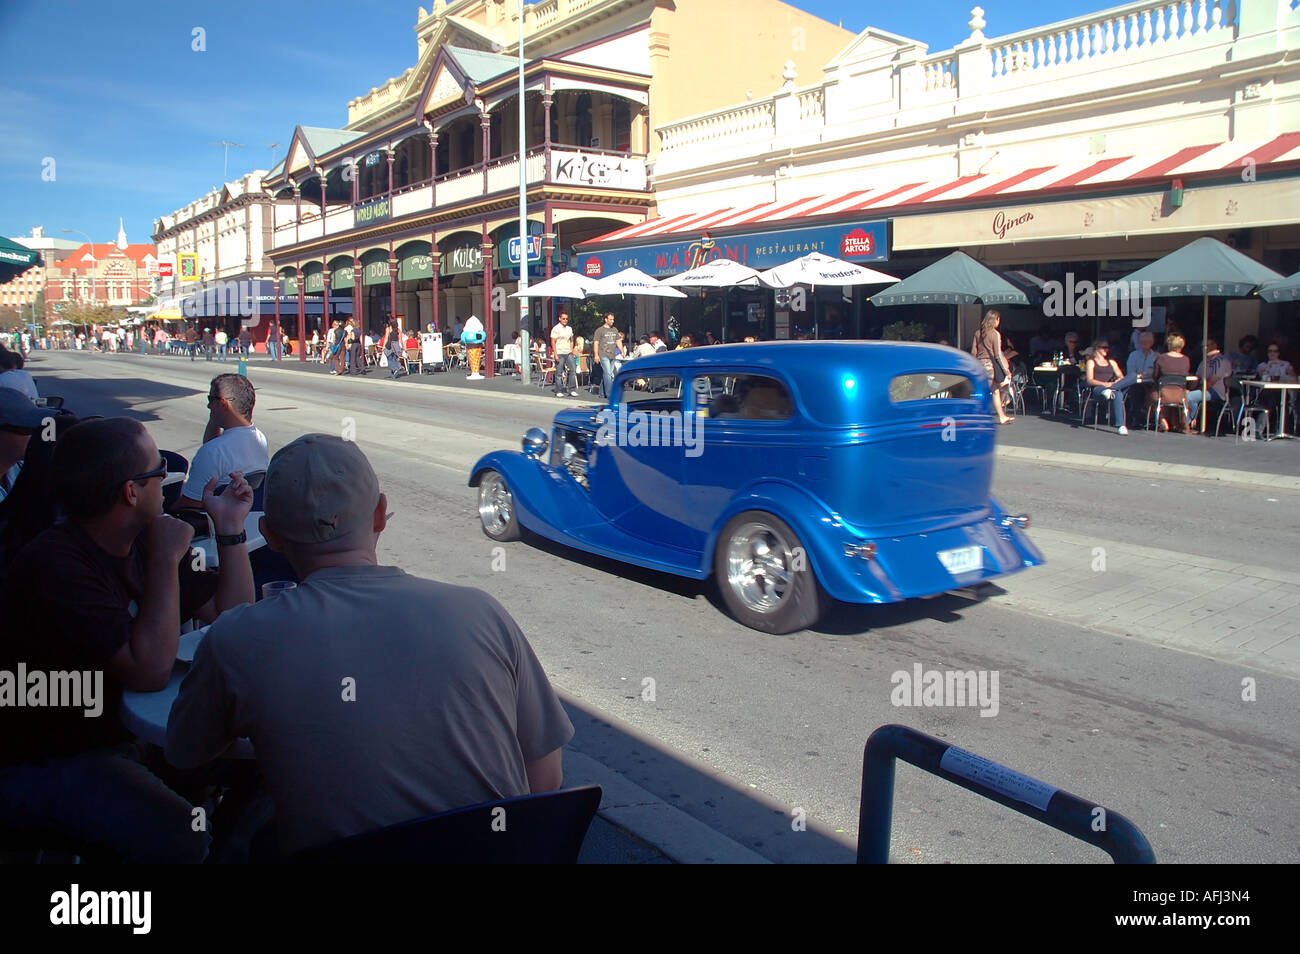 Busy outdoor cafes along the streets of Fremantle Perth Western Australia No MR or PR Stock Photo